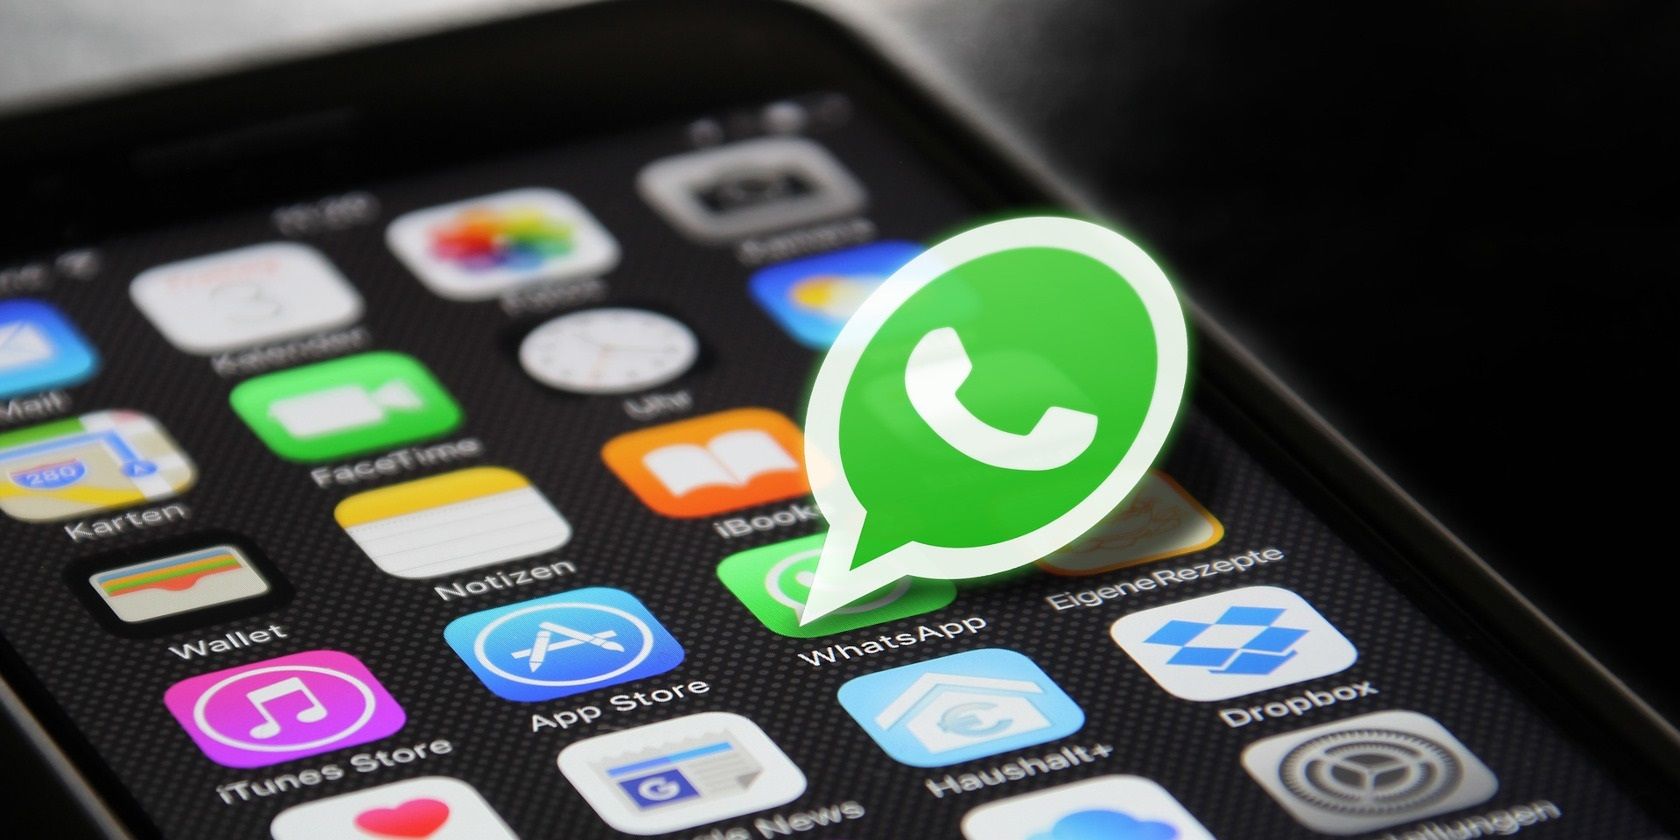 Why Are People Suddenly Looking for WhatsApp Alternatives?